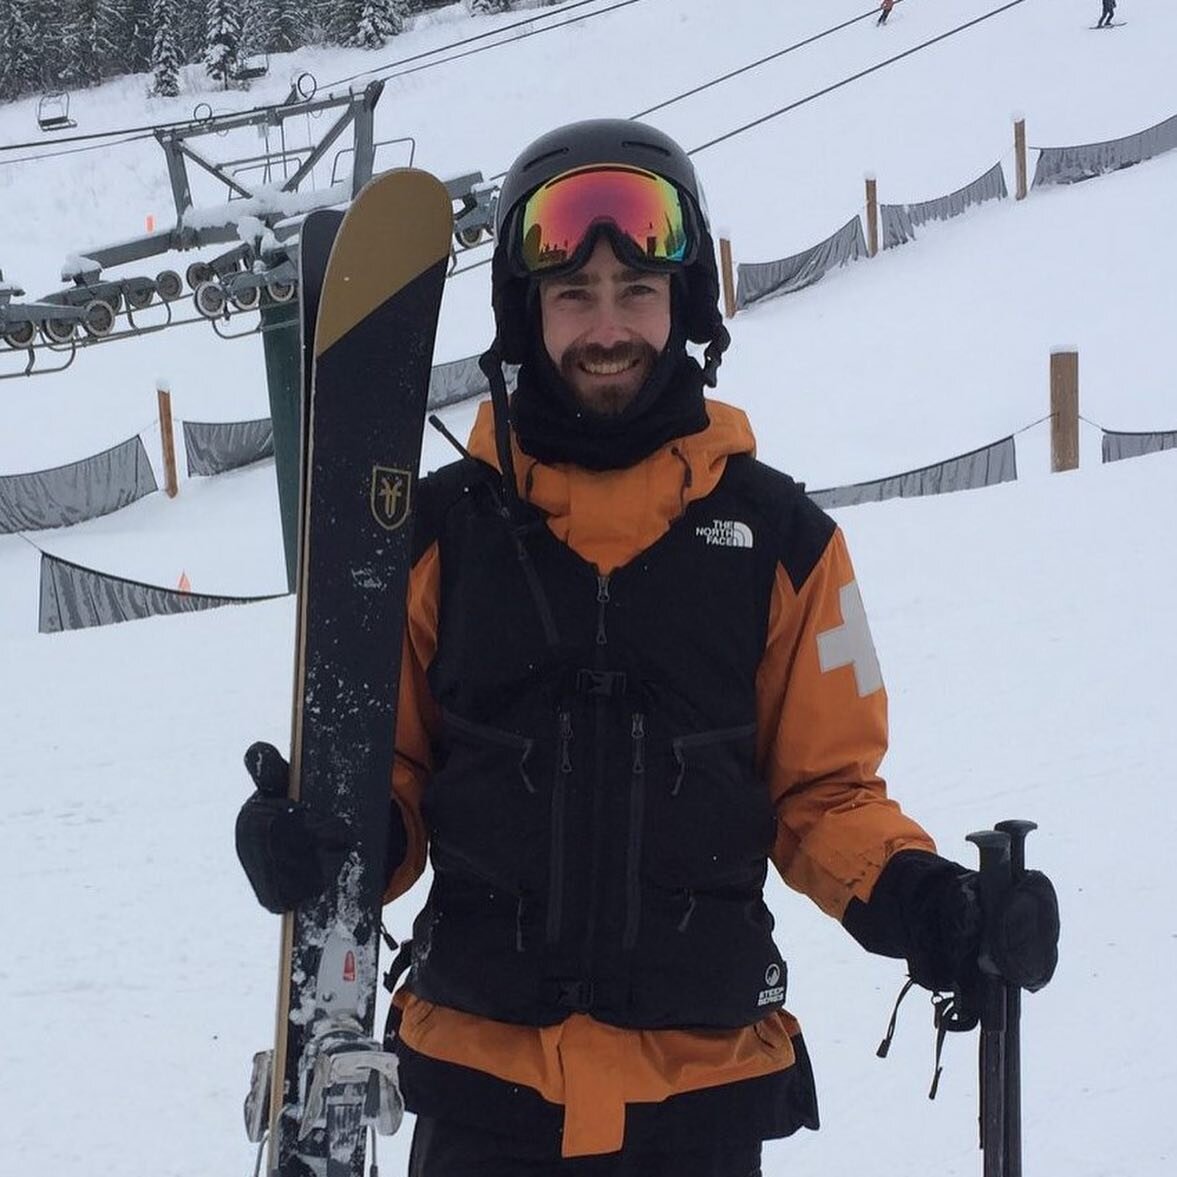 This episode features Peter Barsevskis. Peter is a pro patroller at Kicking Horse Mountain Resort and lives in Golden BC. &nbsp;Peter is working through his Masters degree in Environmental Science at Thompson Rivers University. &nbsp;His research is 